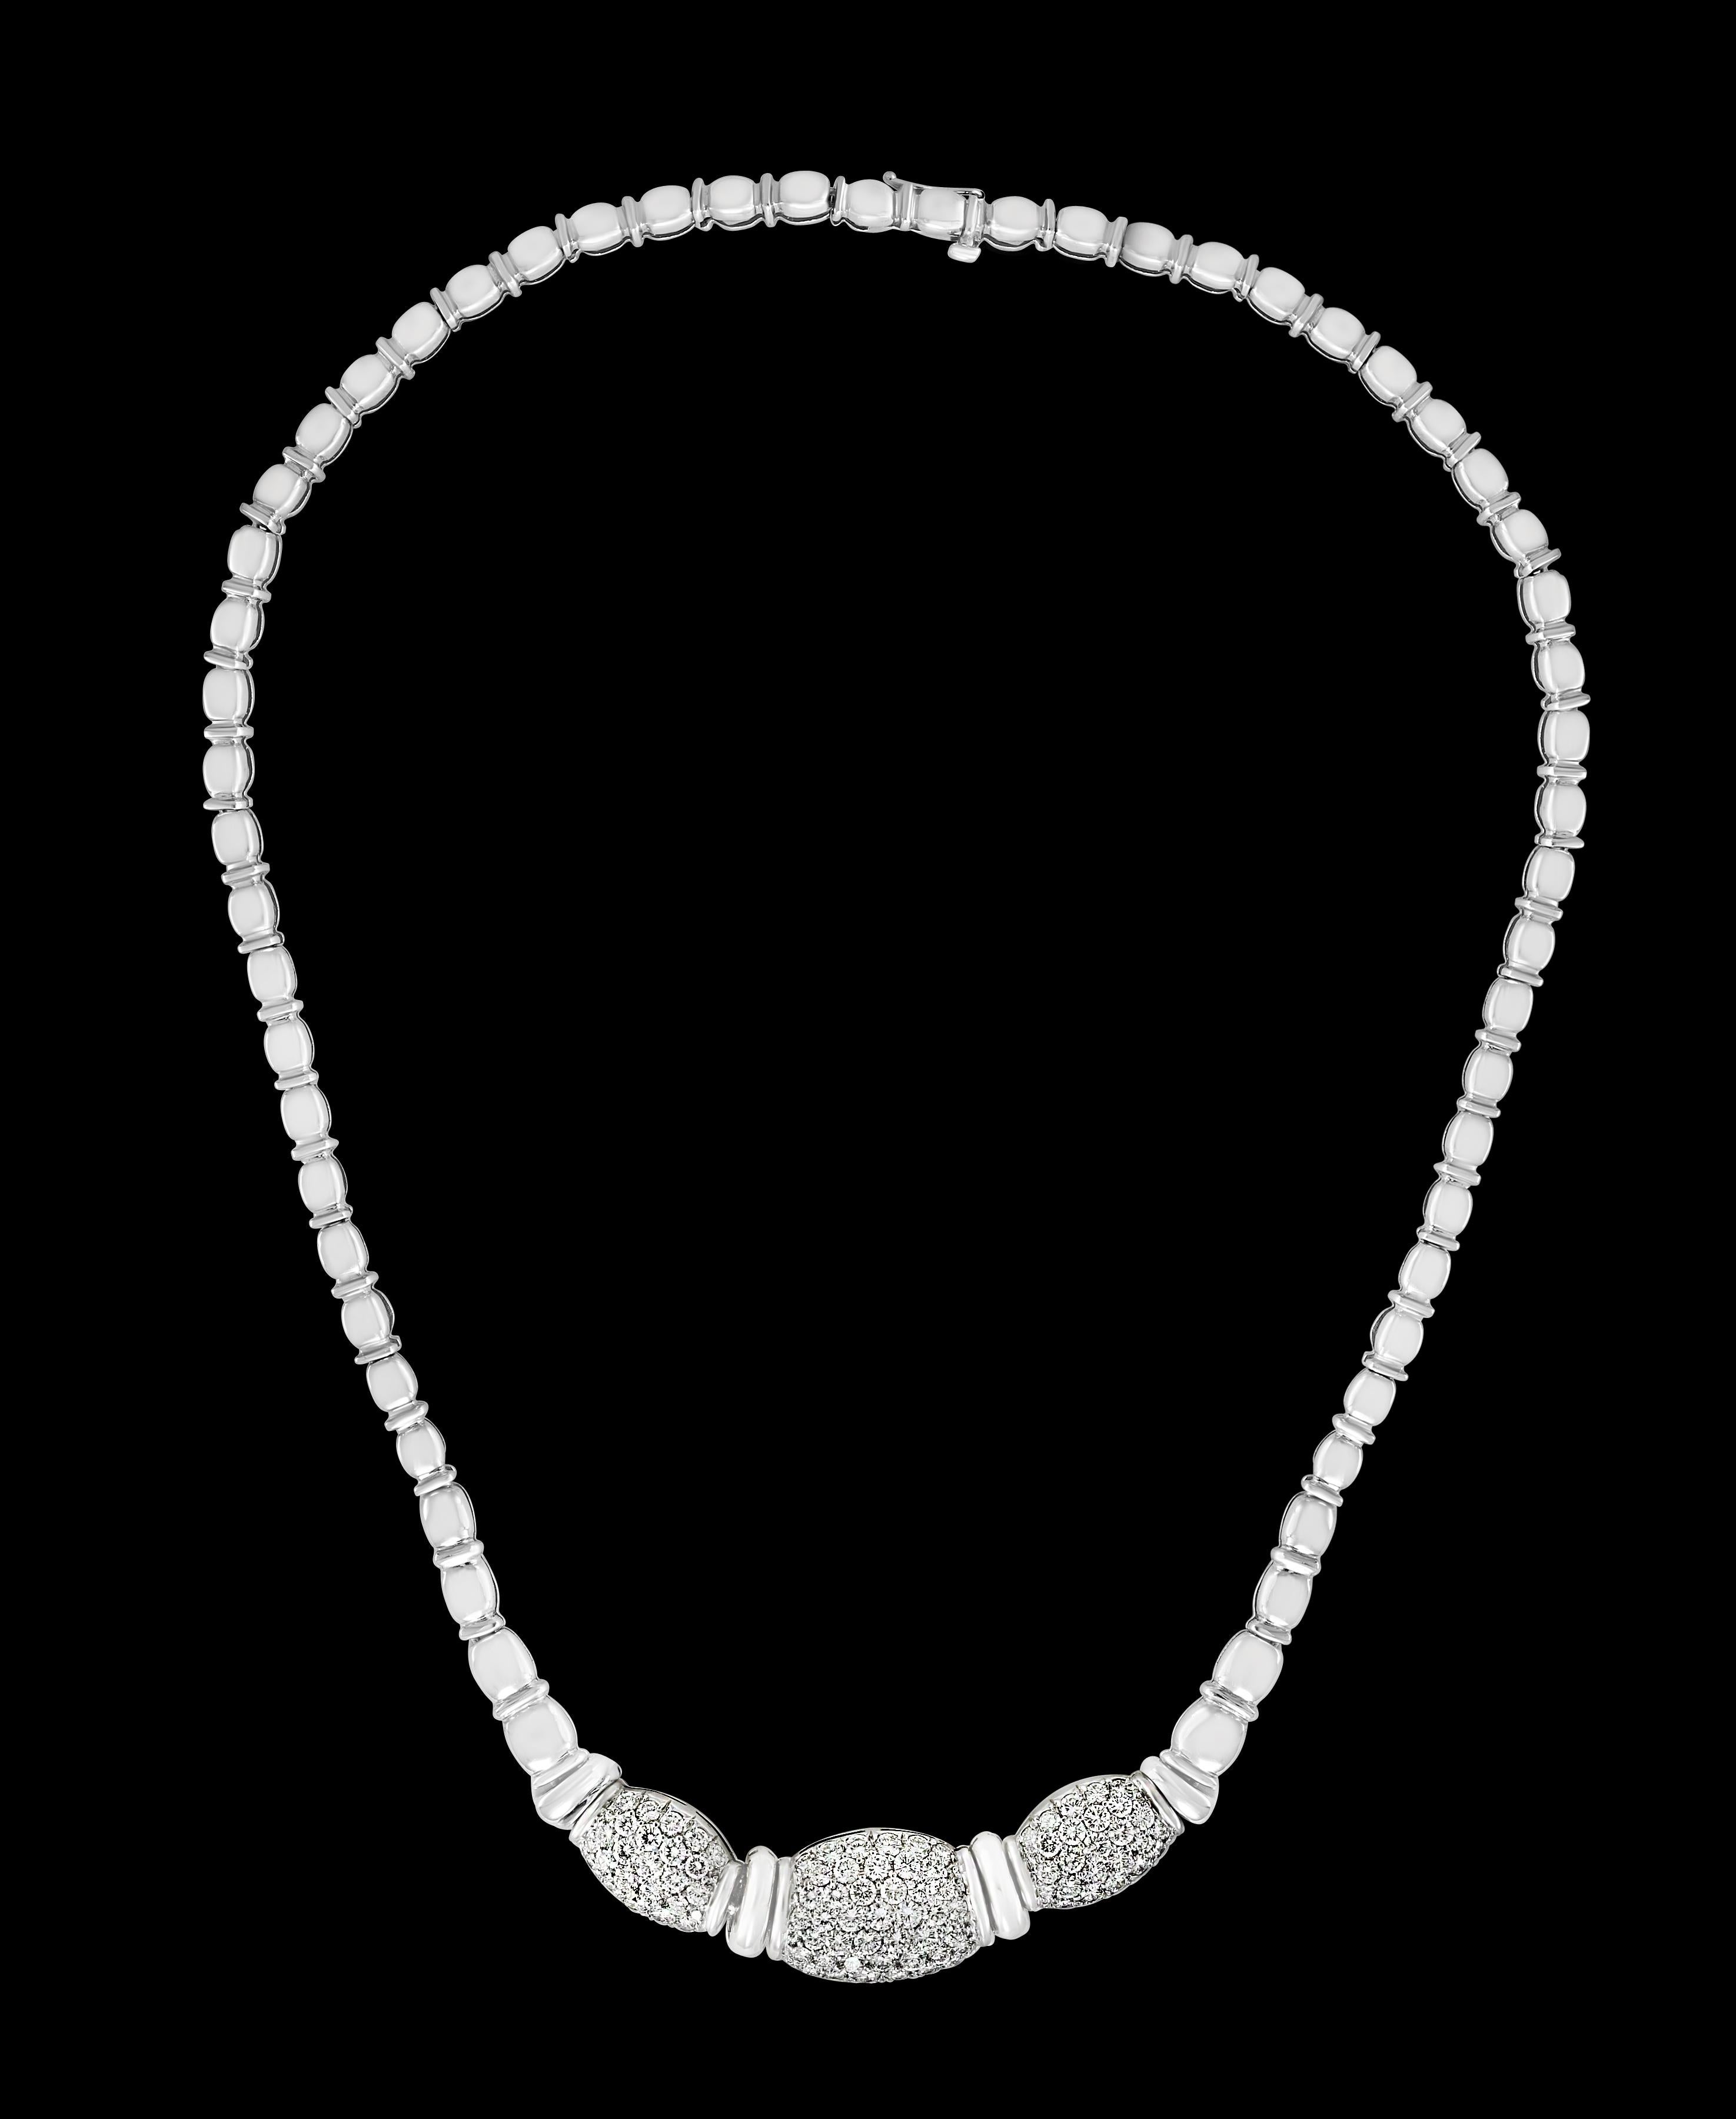 5.8 Carat VS/G Quality Diamond 18 Karat White Gold Necklace Bridal Estate In Excellent Condition For Sale In New York, NY